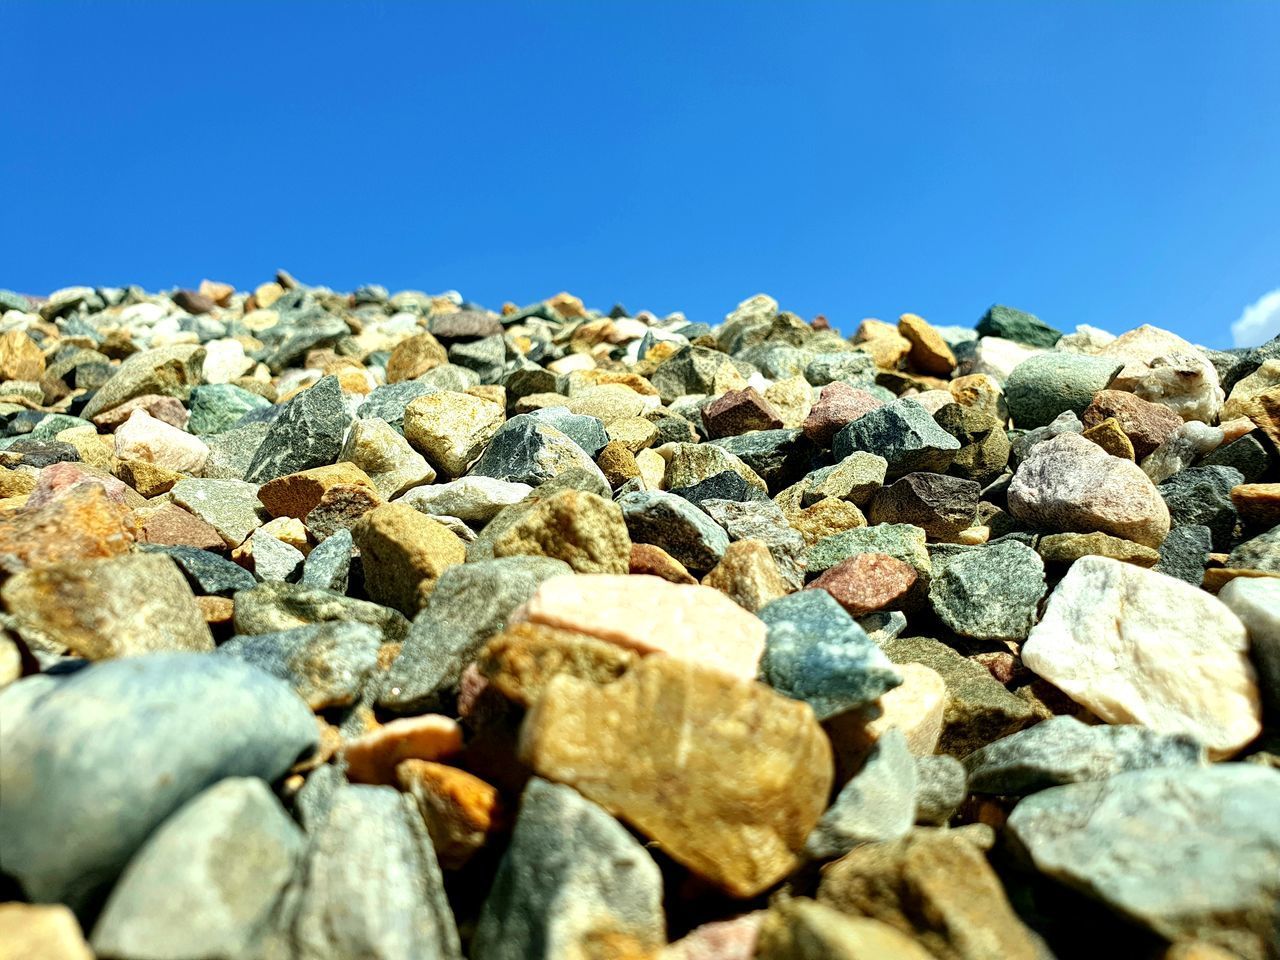 ROCKS AND STONES AGAINST BLUE SKY